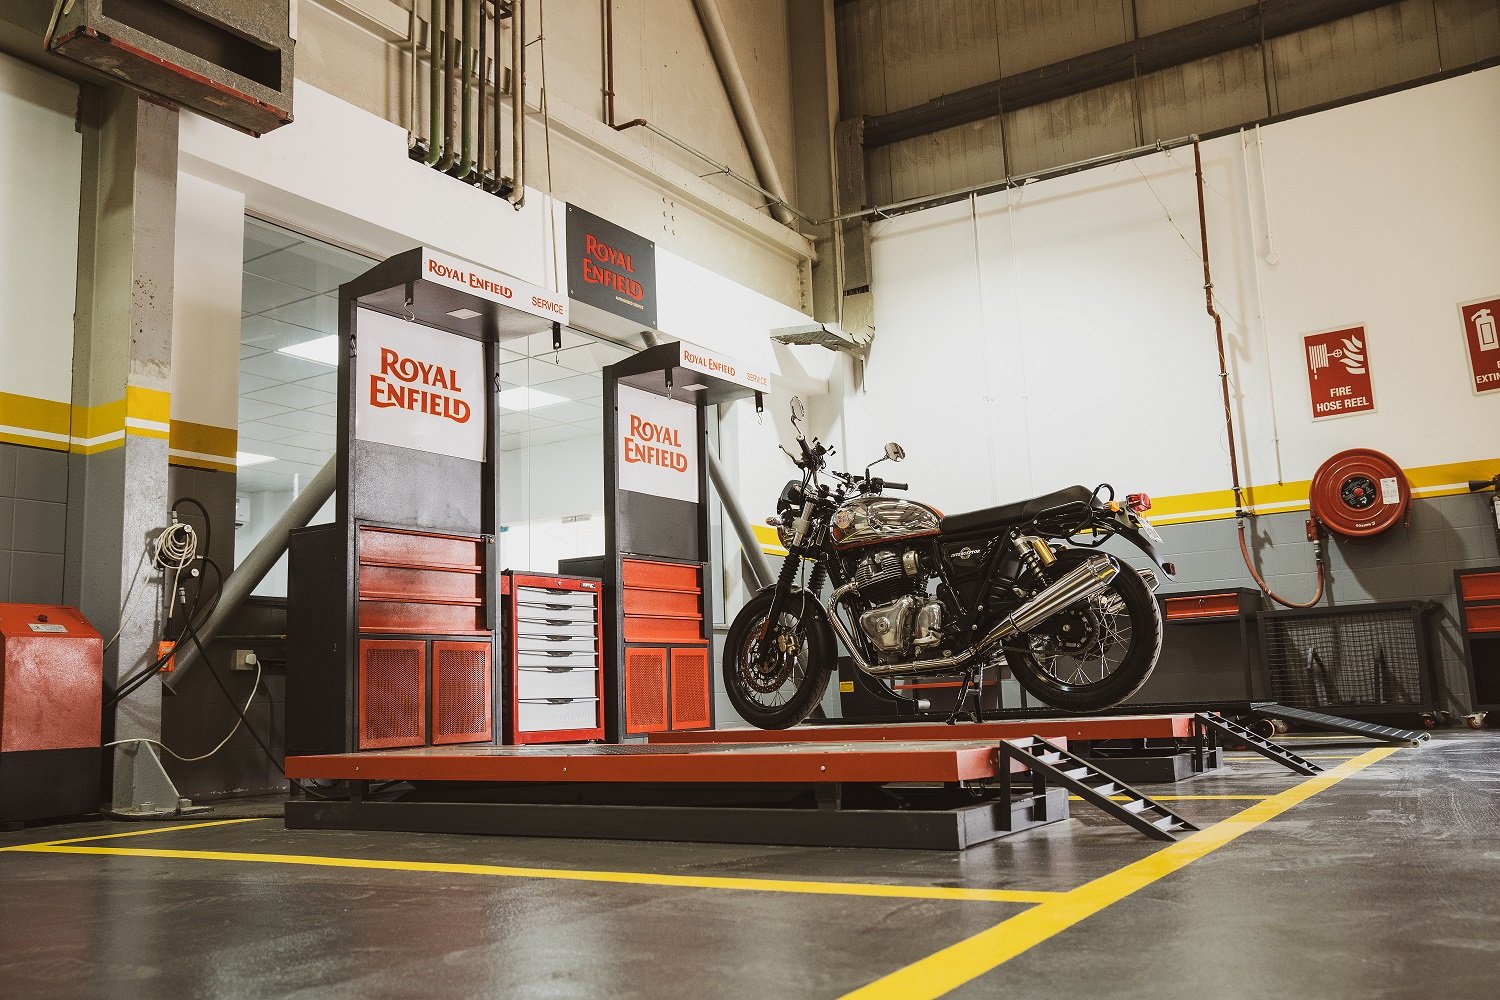 ROYAL ENFIELD STRENGTHENS MIDDLE EAST PRESENCE WITH THE APPOINTMENT OF AW ROSTAMANI GROUP AS OFFICIAL DISTRIBUTOR FOR THE UAE